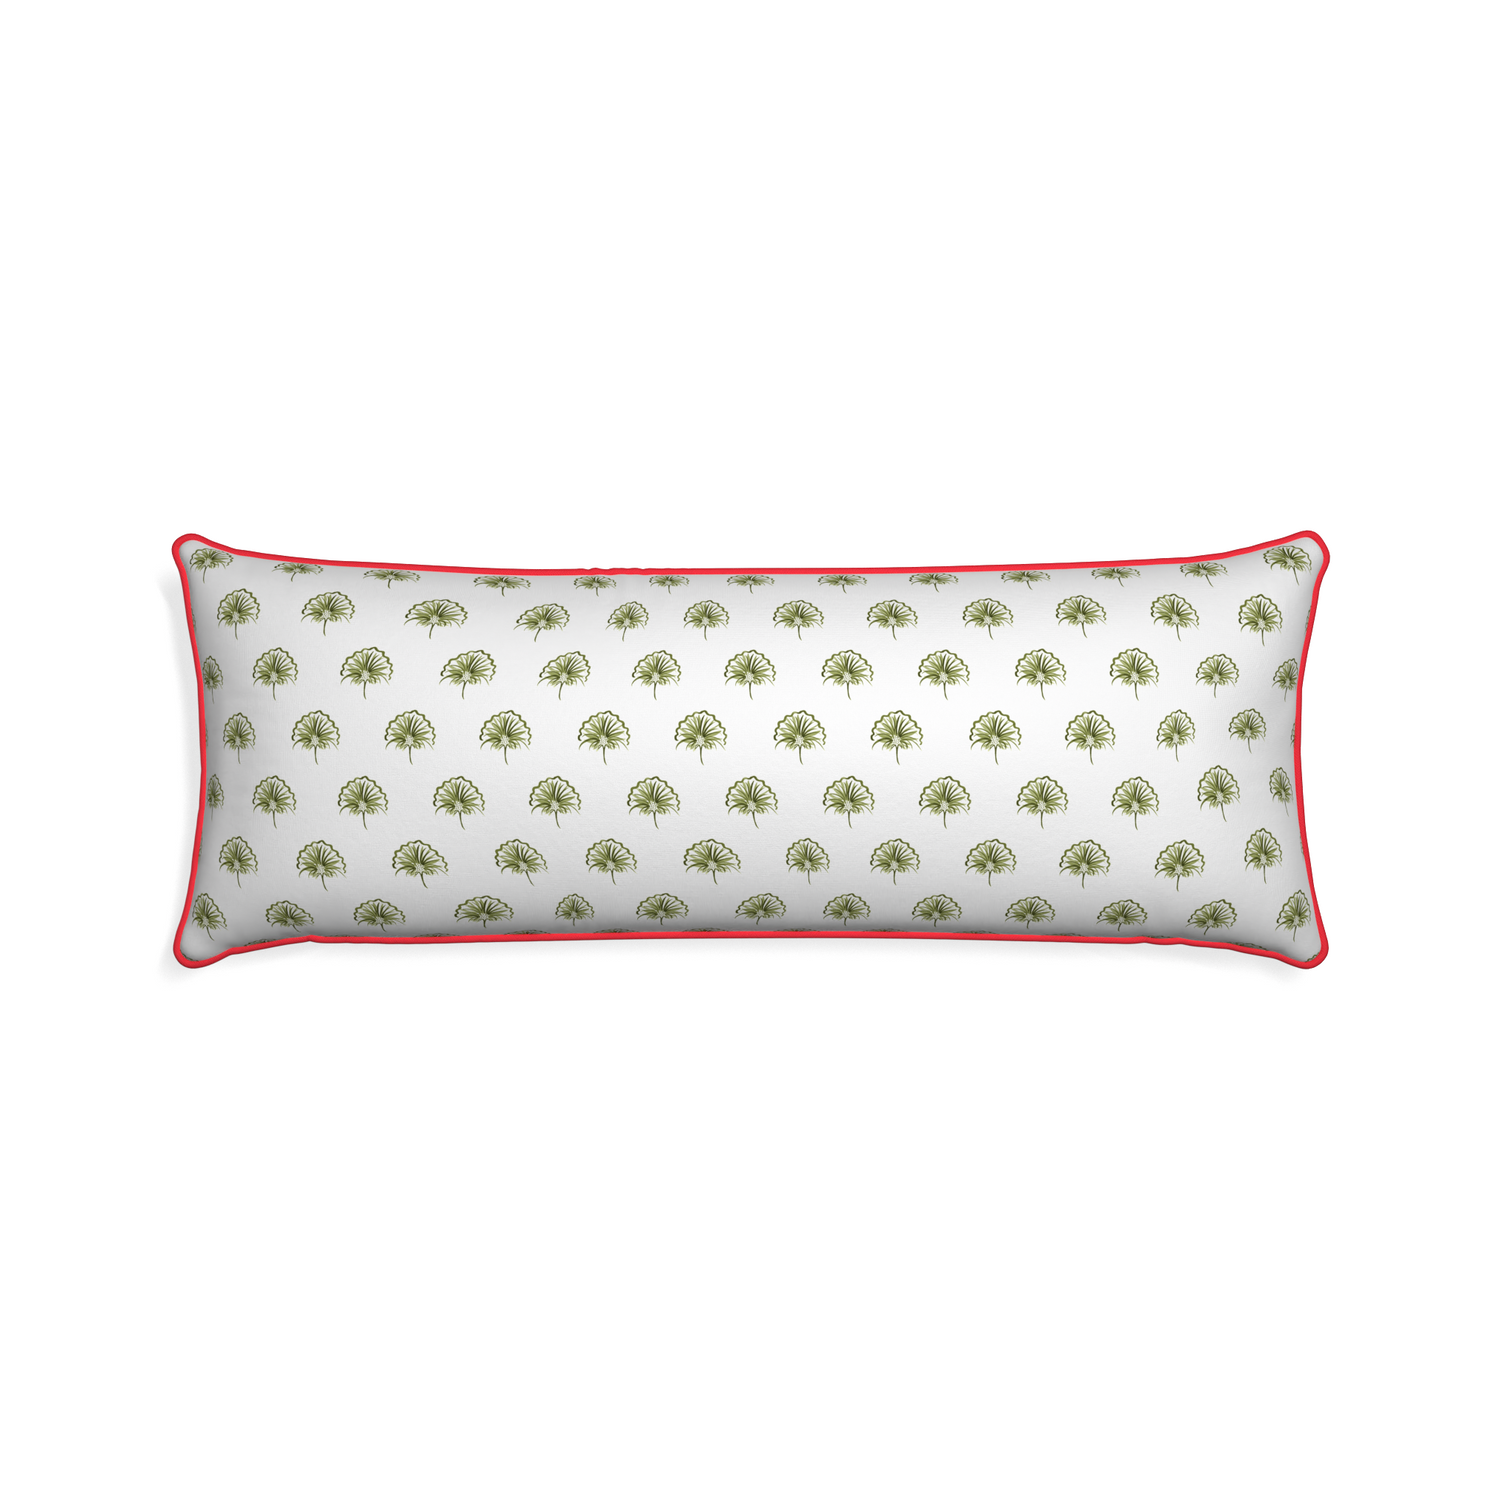 Xl-lumbar penelope moss custom green floralpillow with cherry piping on white background